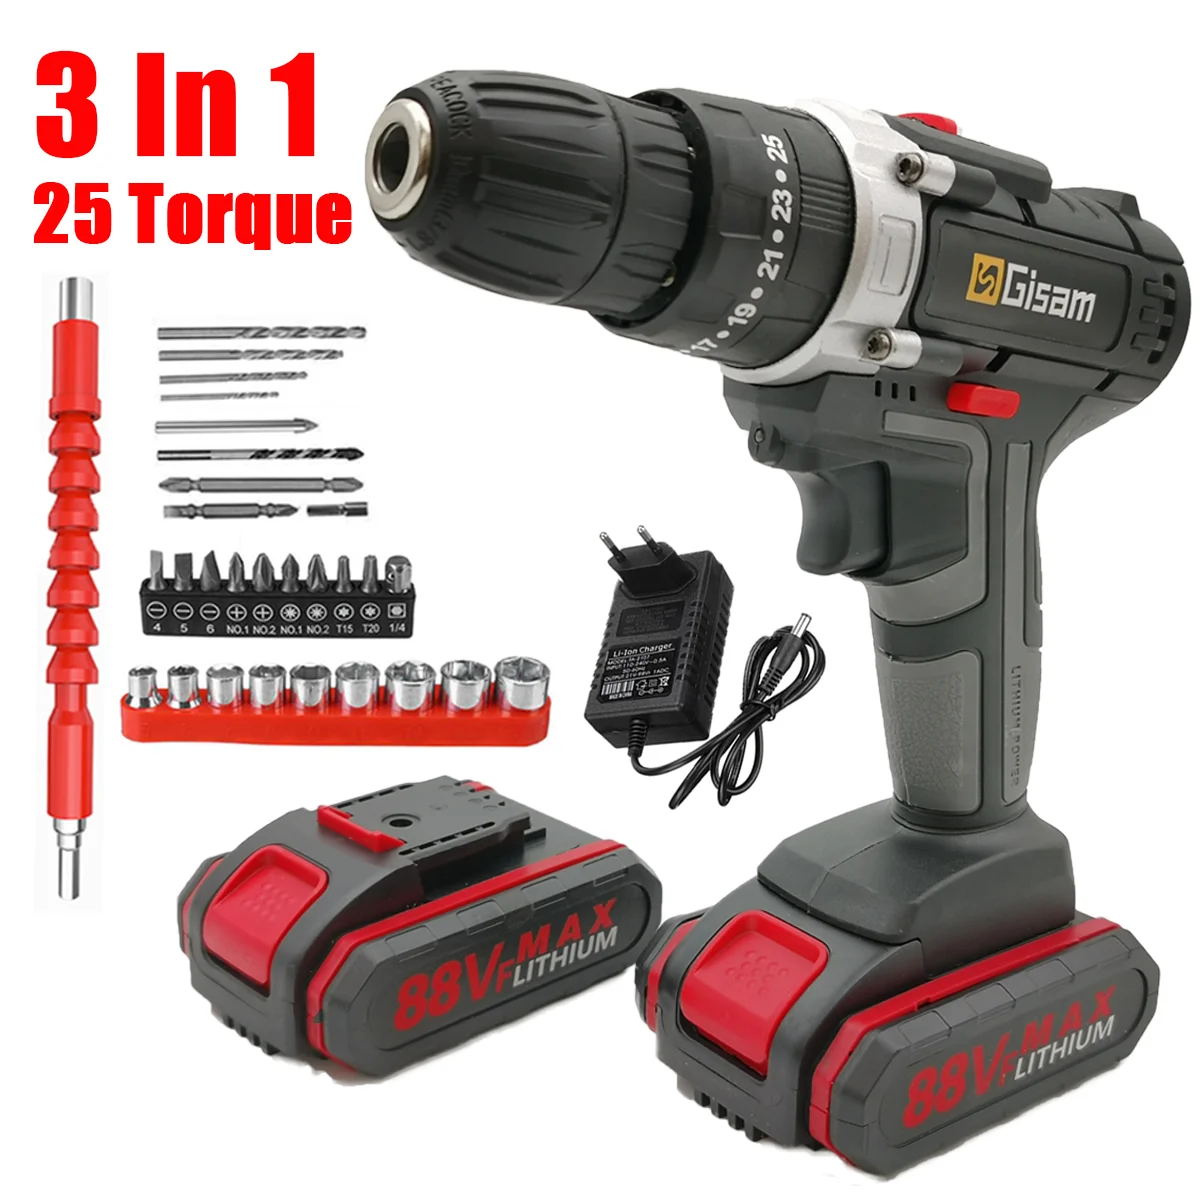 

25+3 Torque Electirc Impact Cordless Drill Battery Drill Screwdriver Woodworking Power Tools Hammer Drill Electric Drill Machine